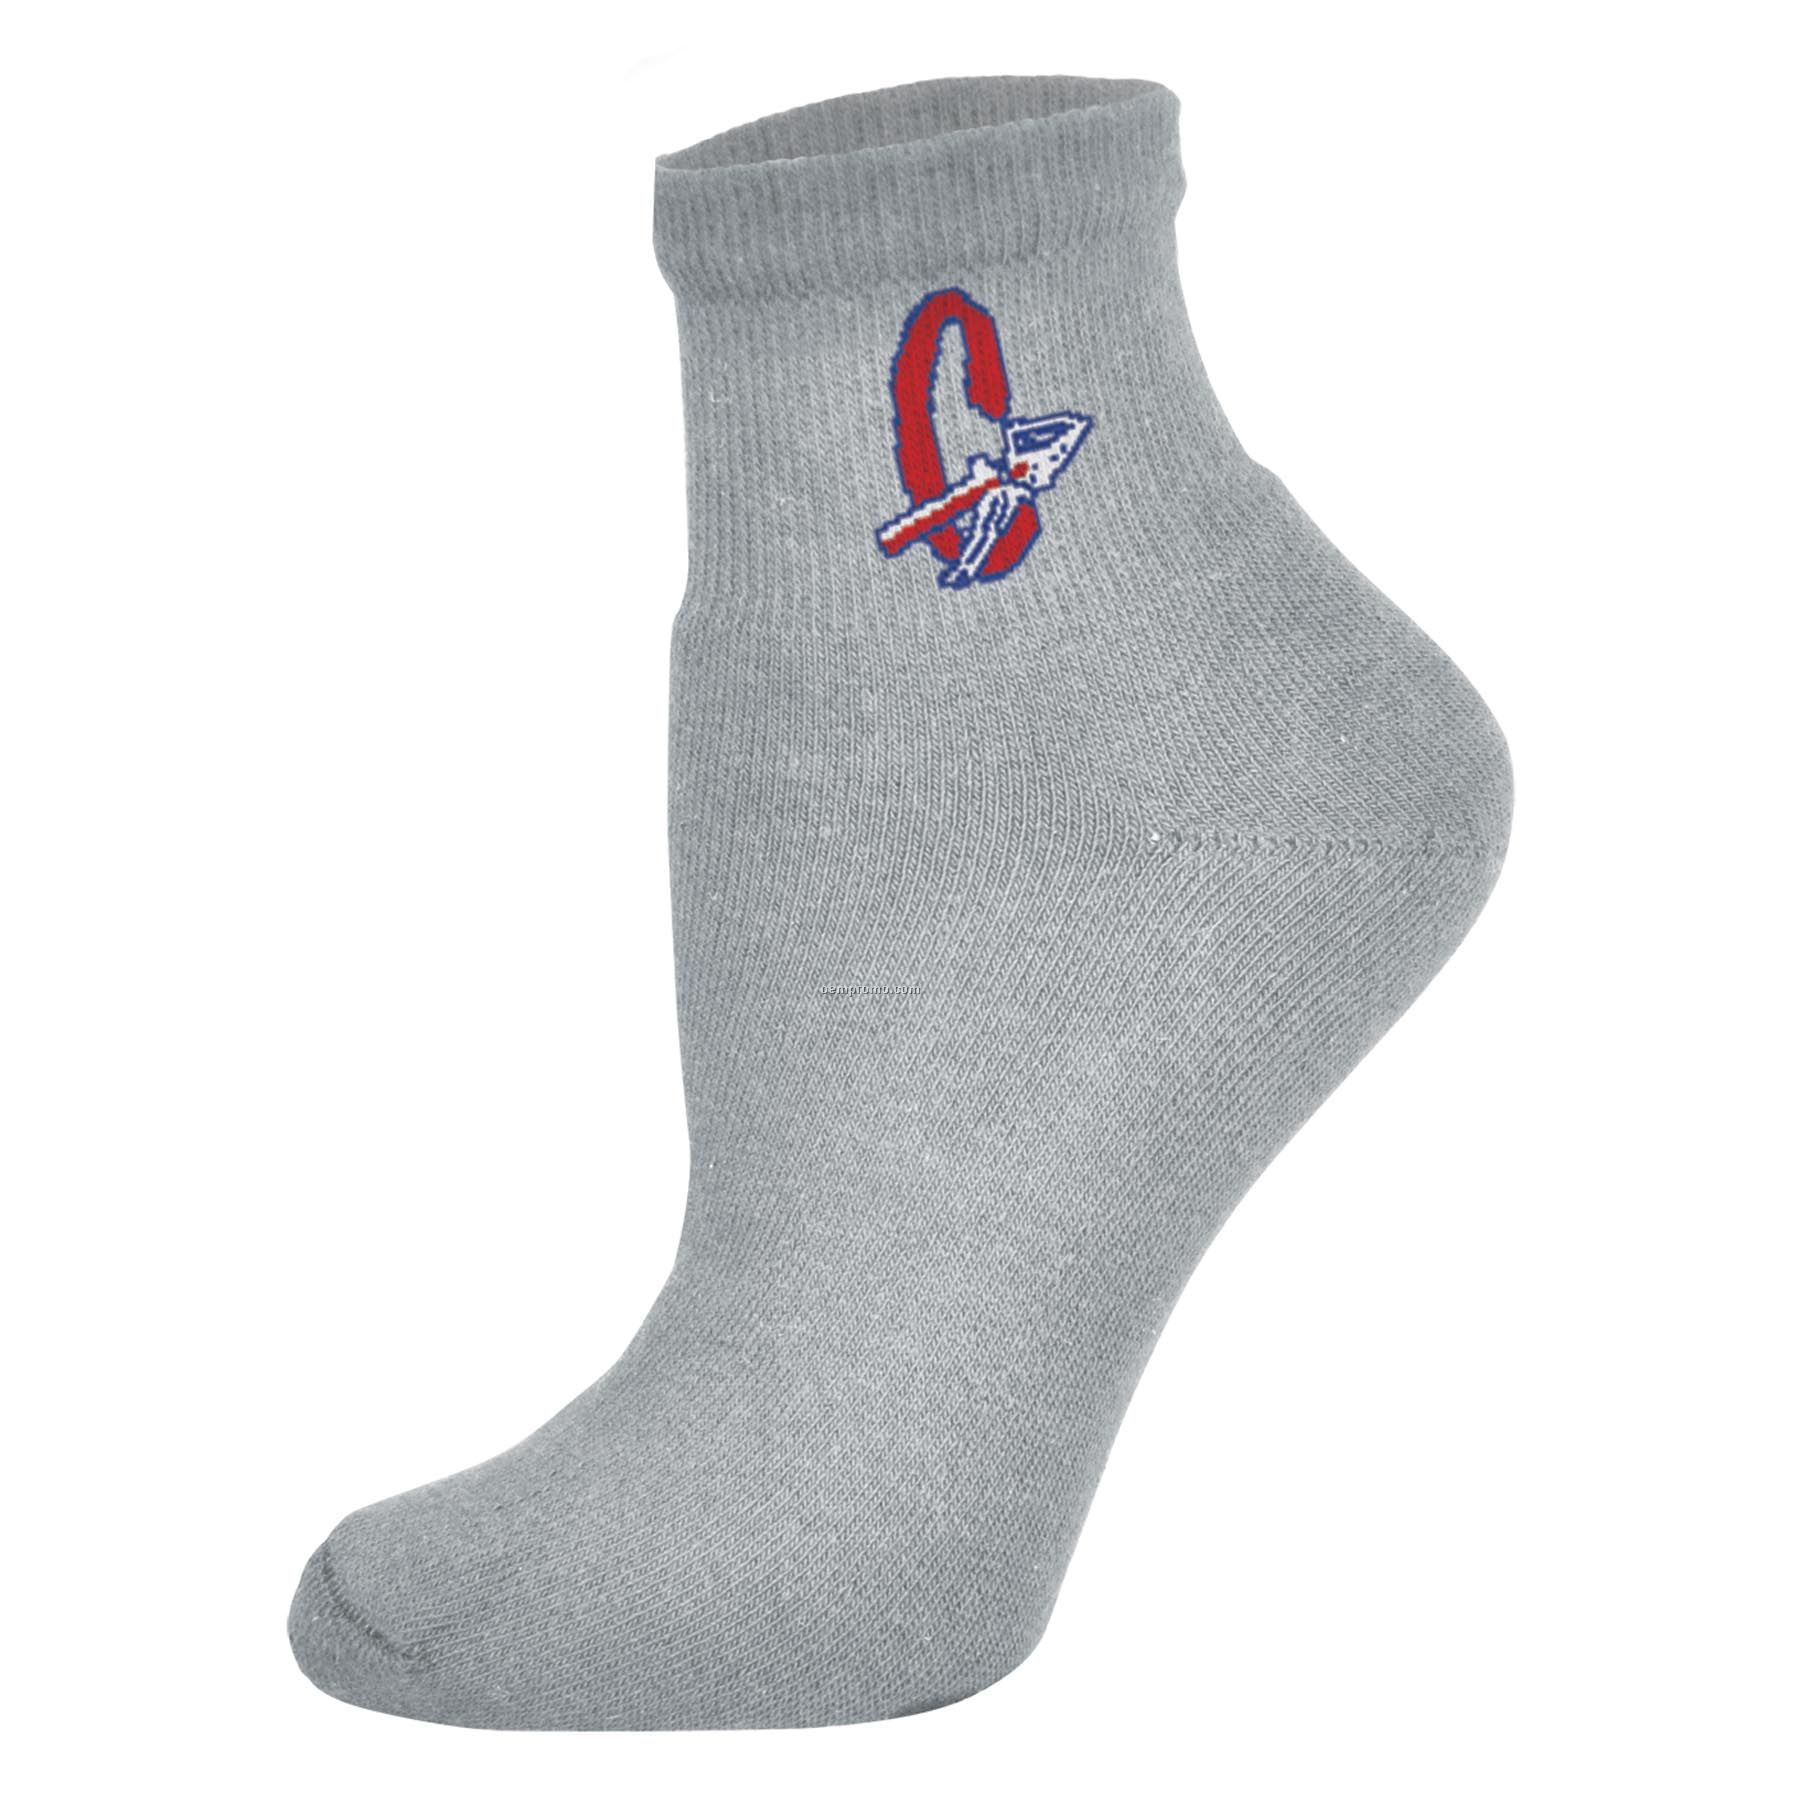 Full Cushion Anklet Sock With Knit-in Logo